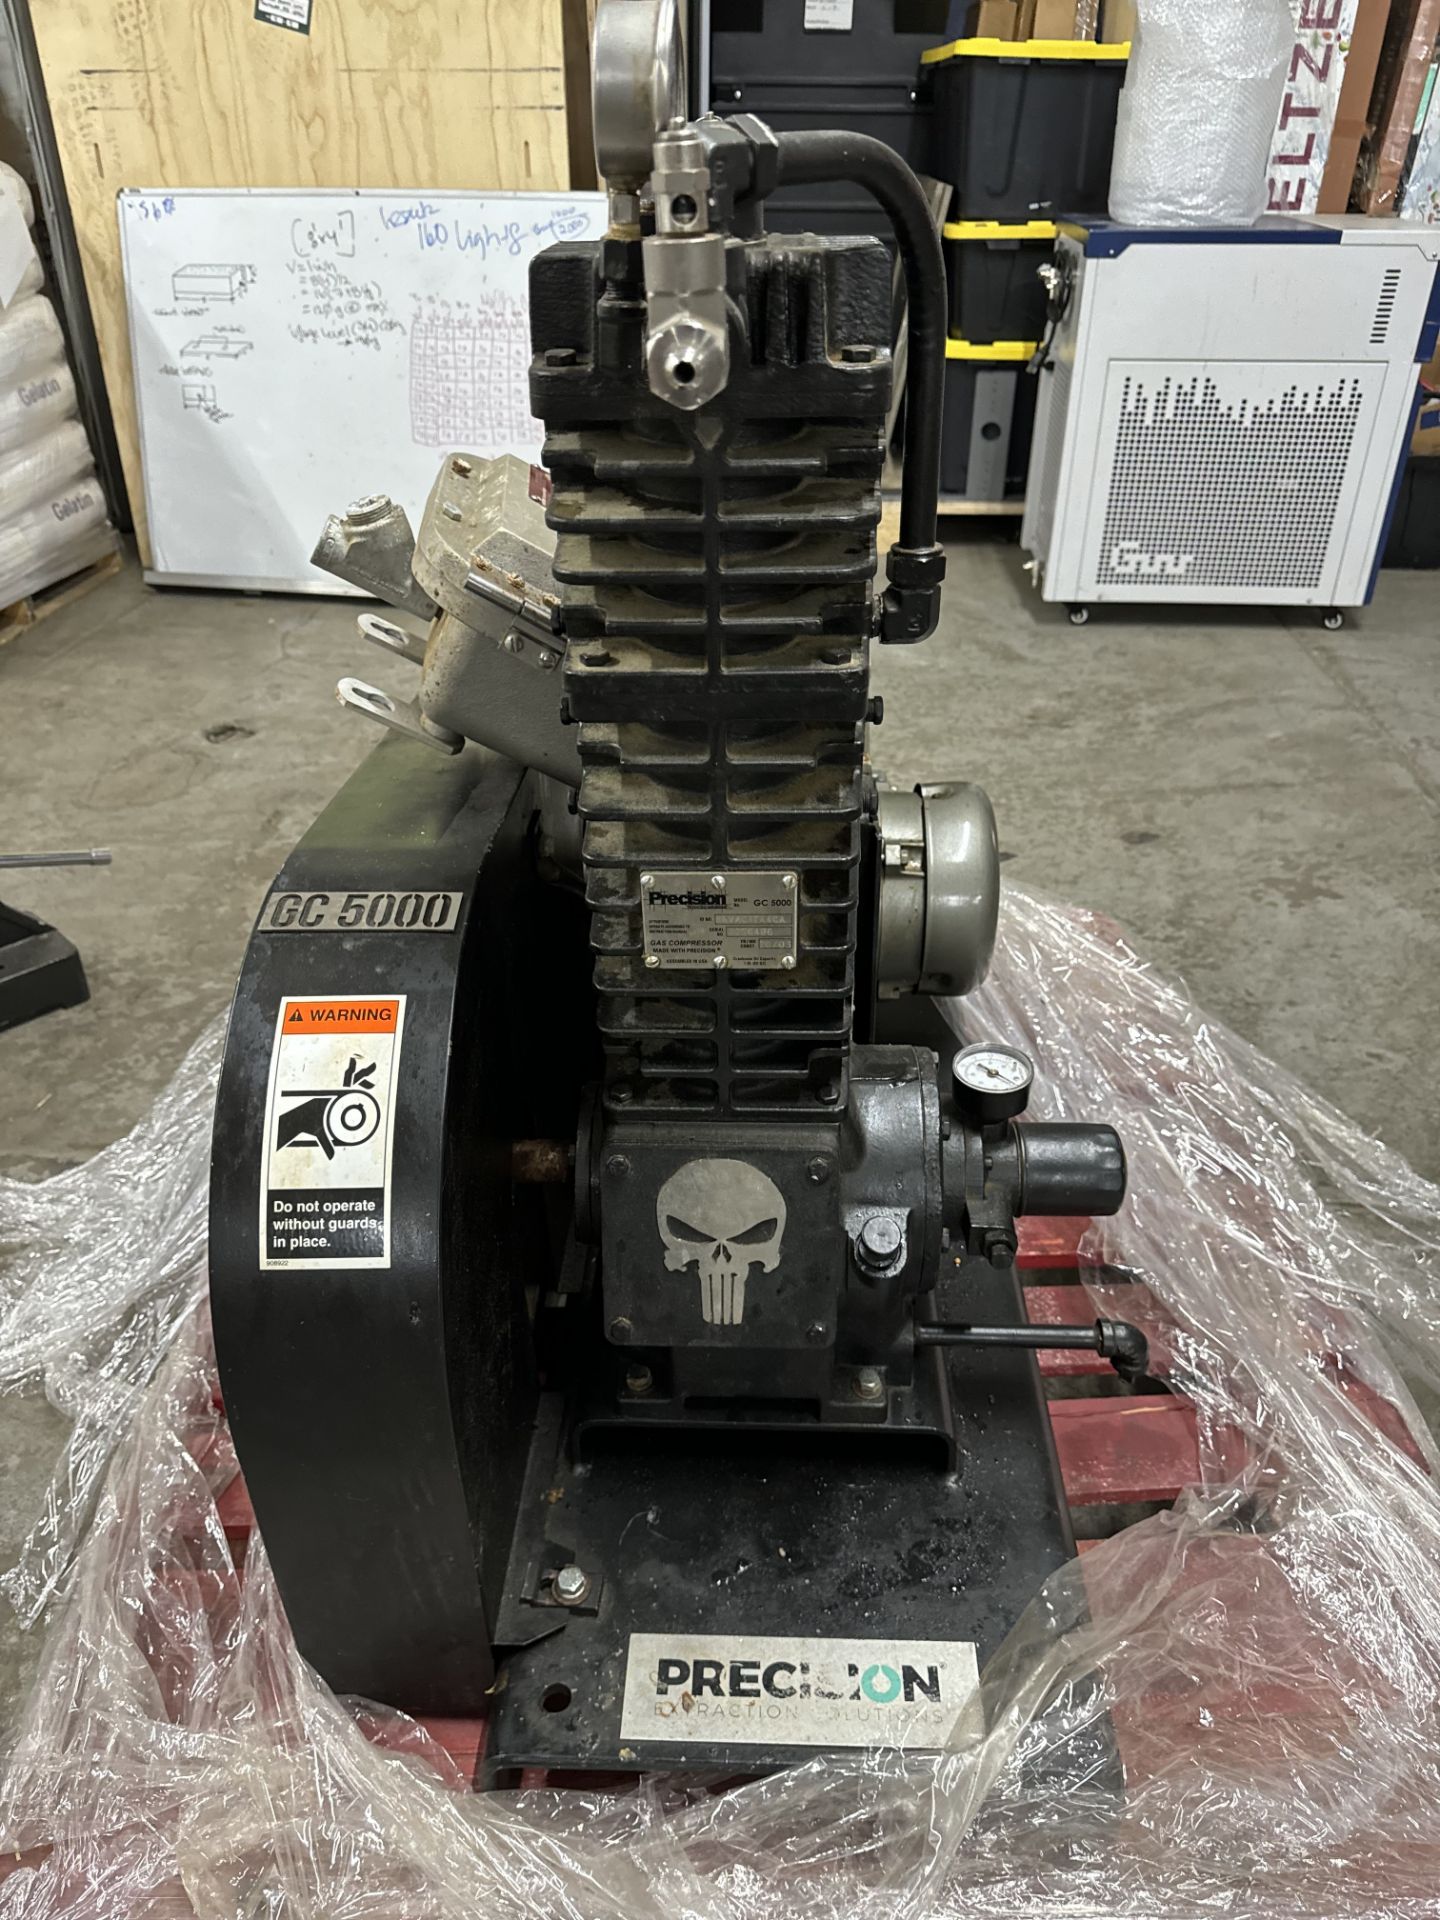 Used Precision Extraction GC5000 Solvent Recovery Gas Compressor w/ Rebuild Kit. Model GC5000 - Image 2 of 8